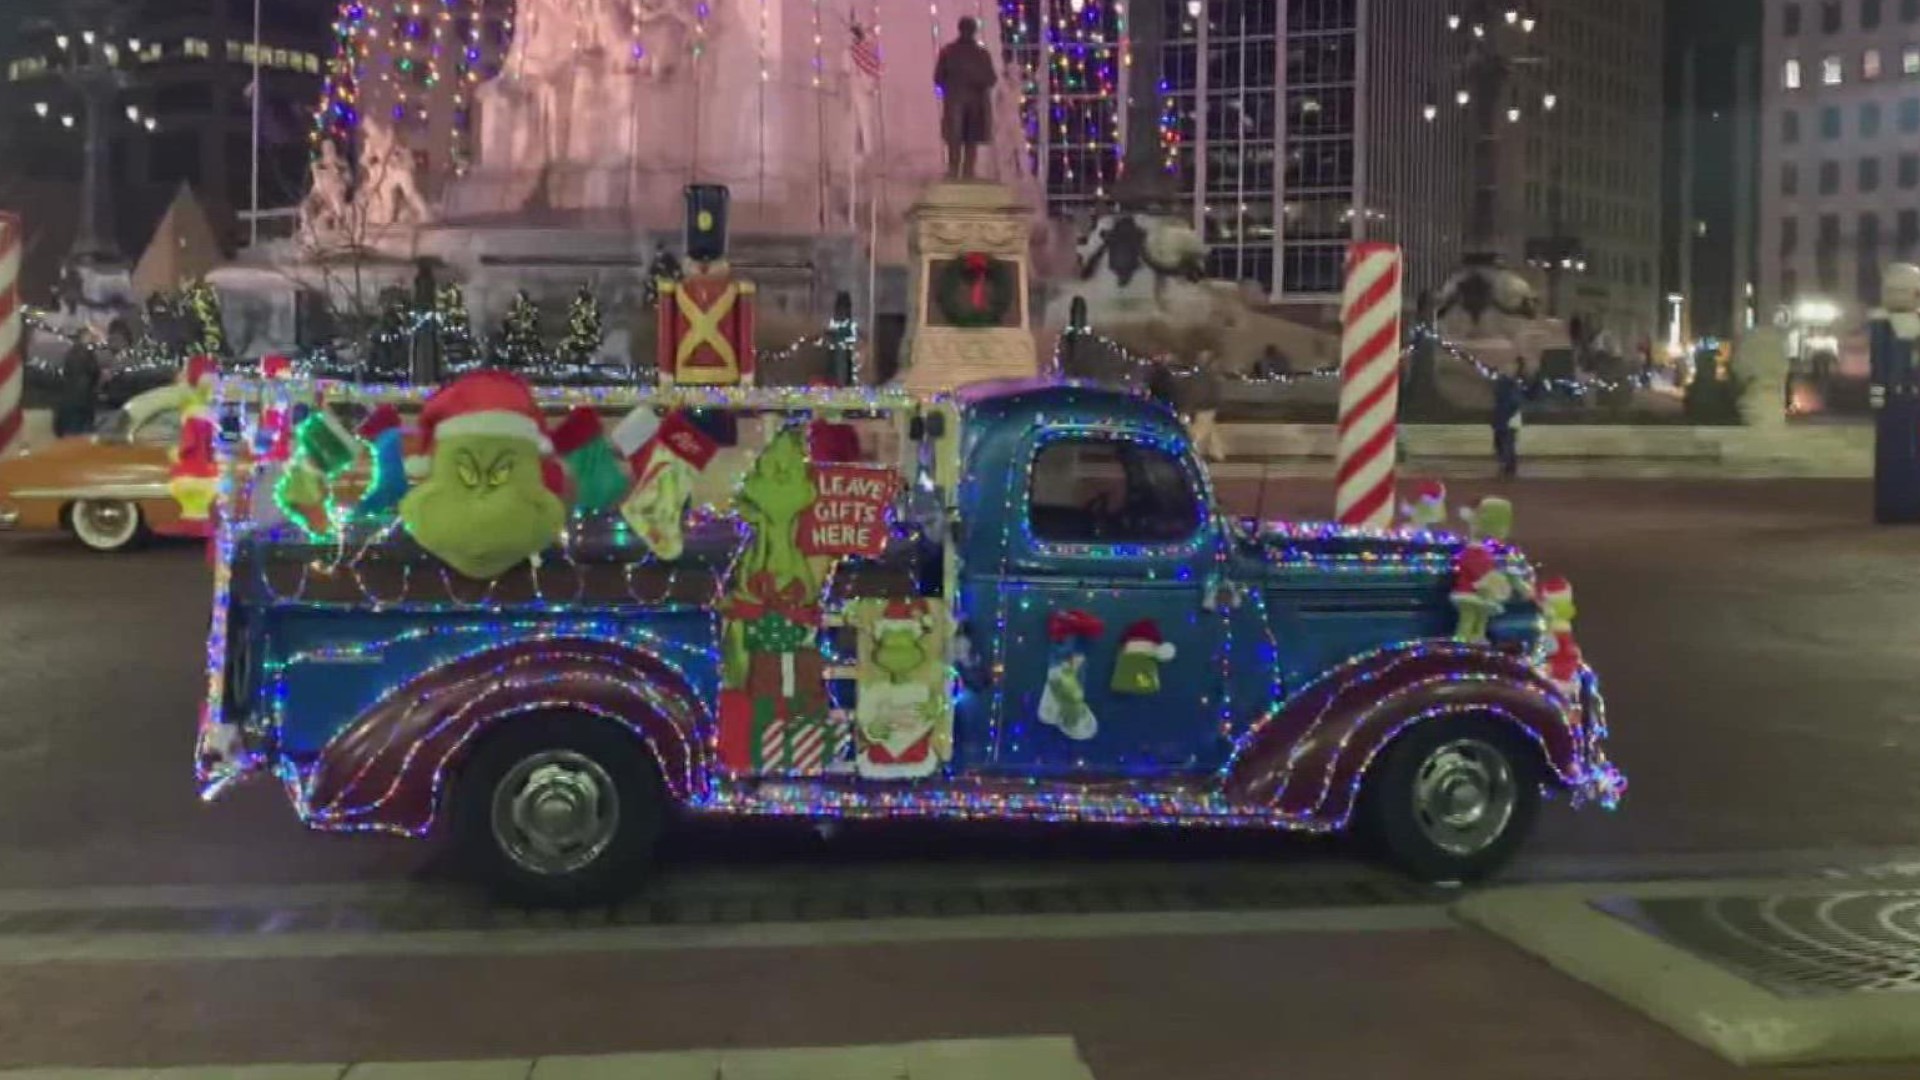 The brightly-decorated Chevrolet truck gets new additions every year.